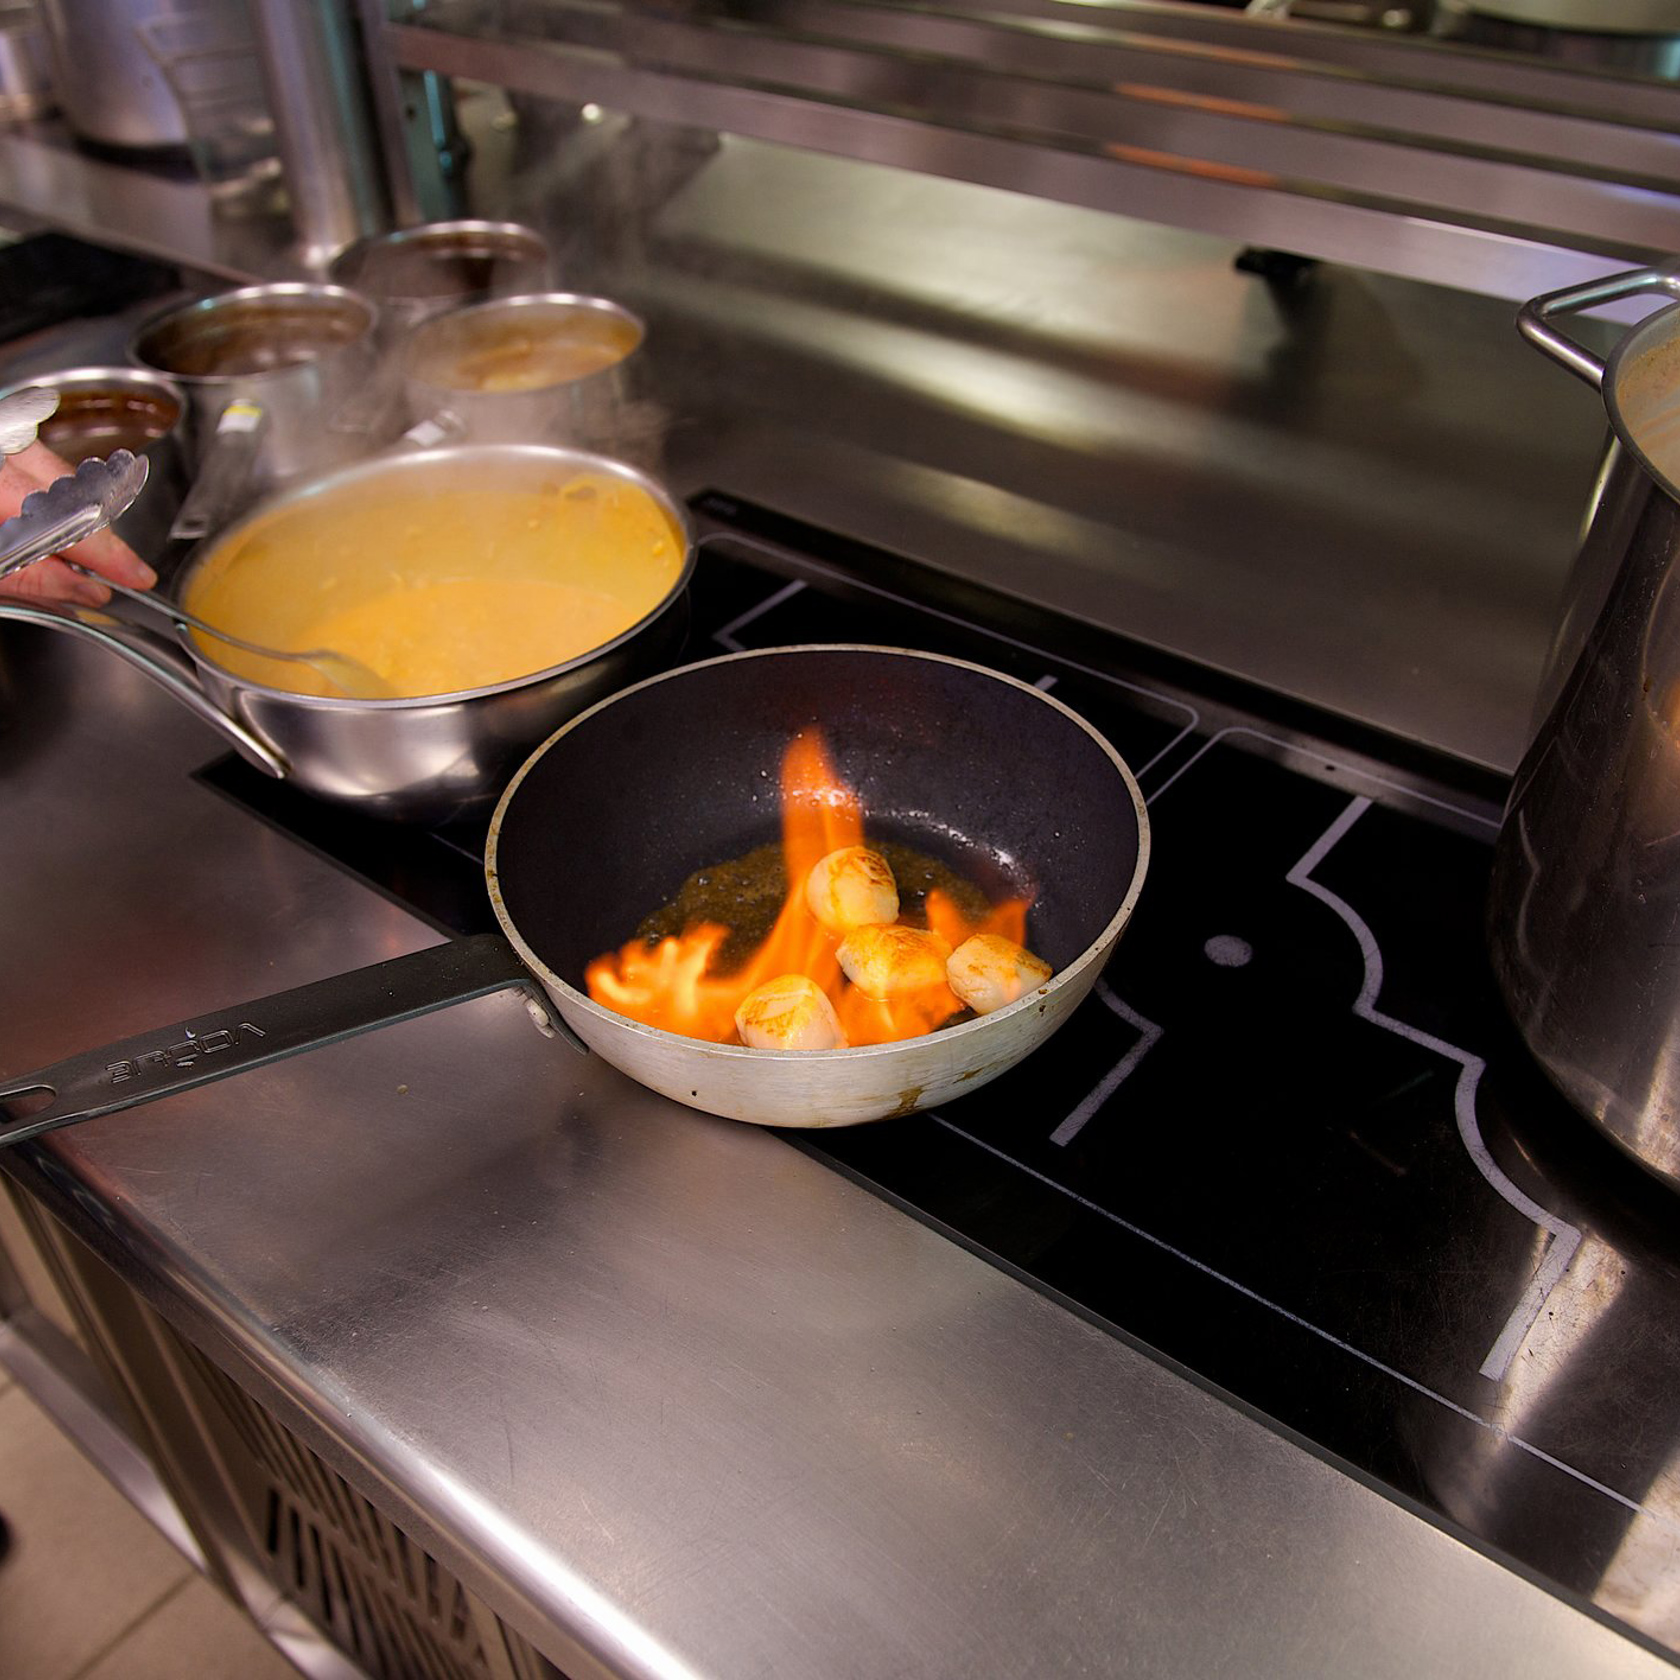 Food cooking on an electric induction hob